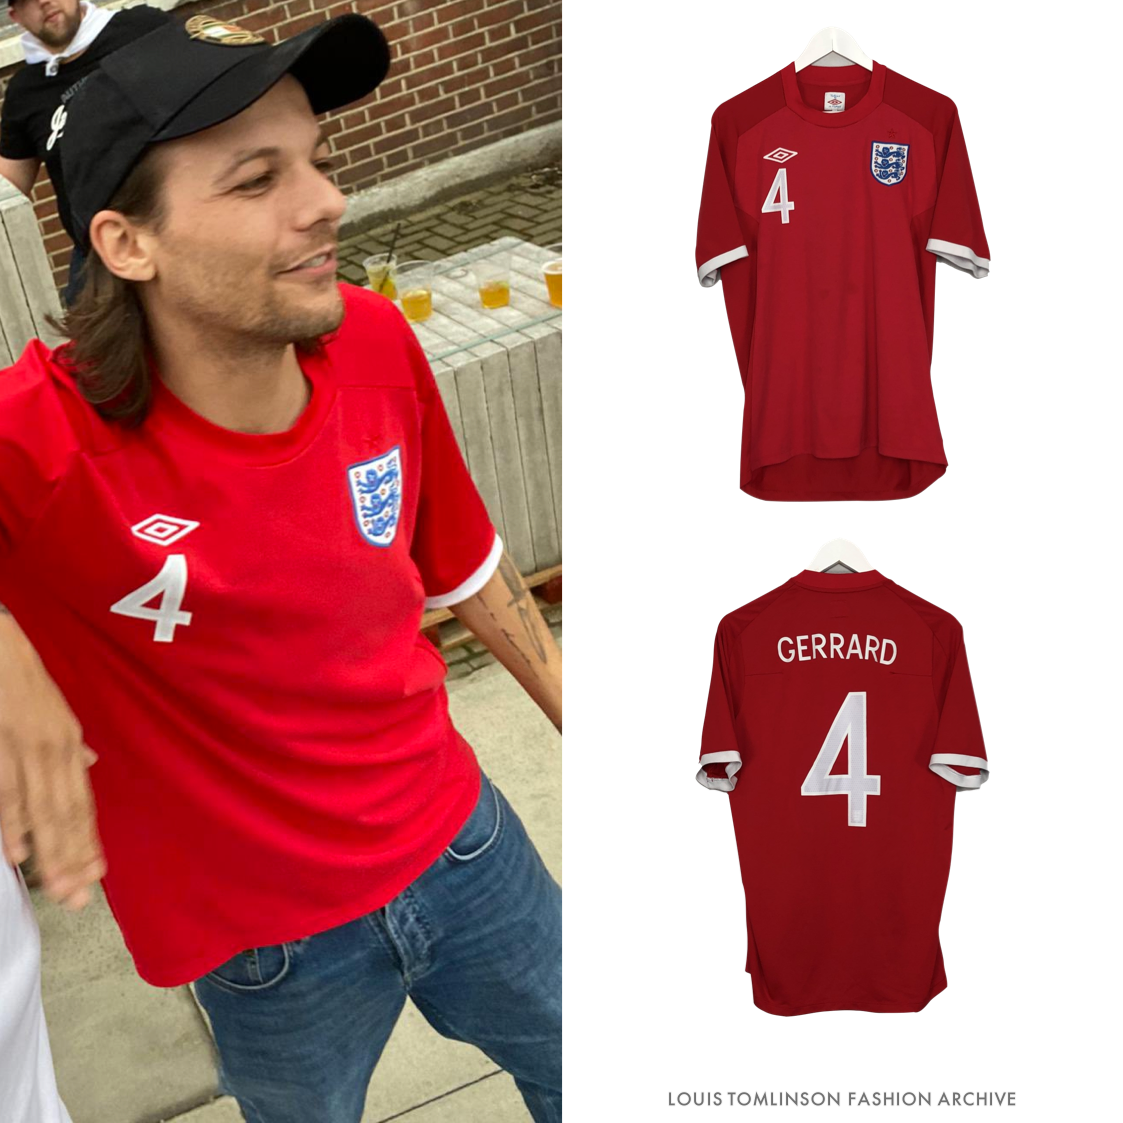 Louis Tomlinson ✔️ (@Louist_____91) — 717 answers, 19590 likes